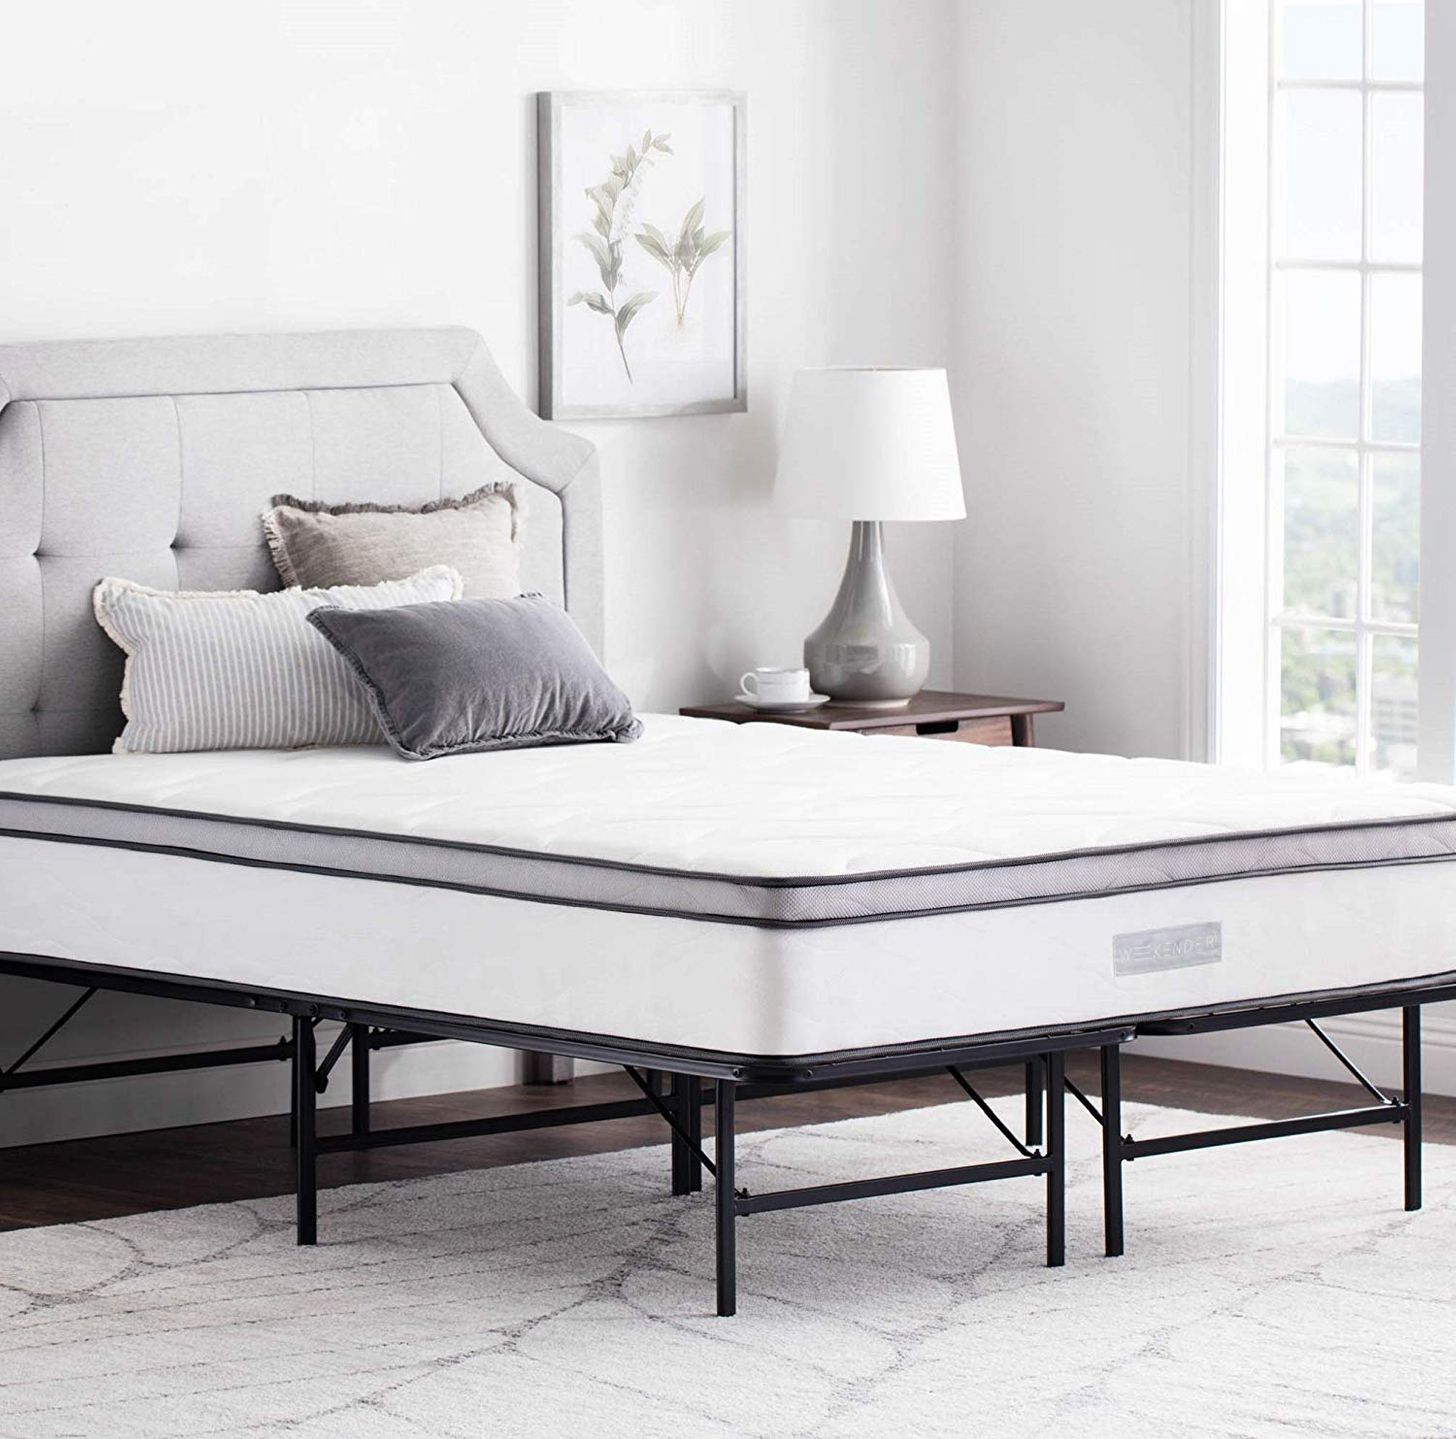 19 Best Metal Bed Frames 2020 The, How To Get Rid Of Bed Frame And Box Spring